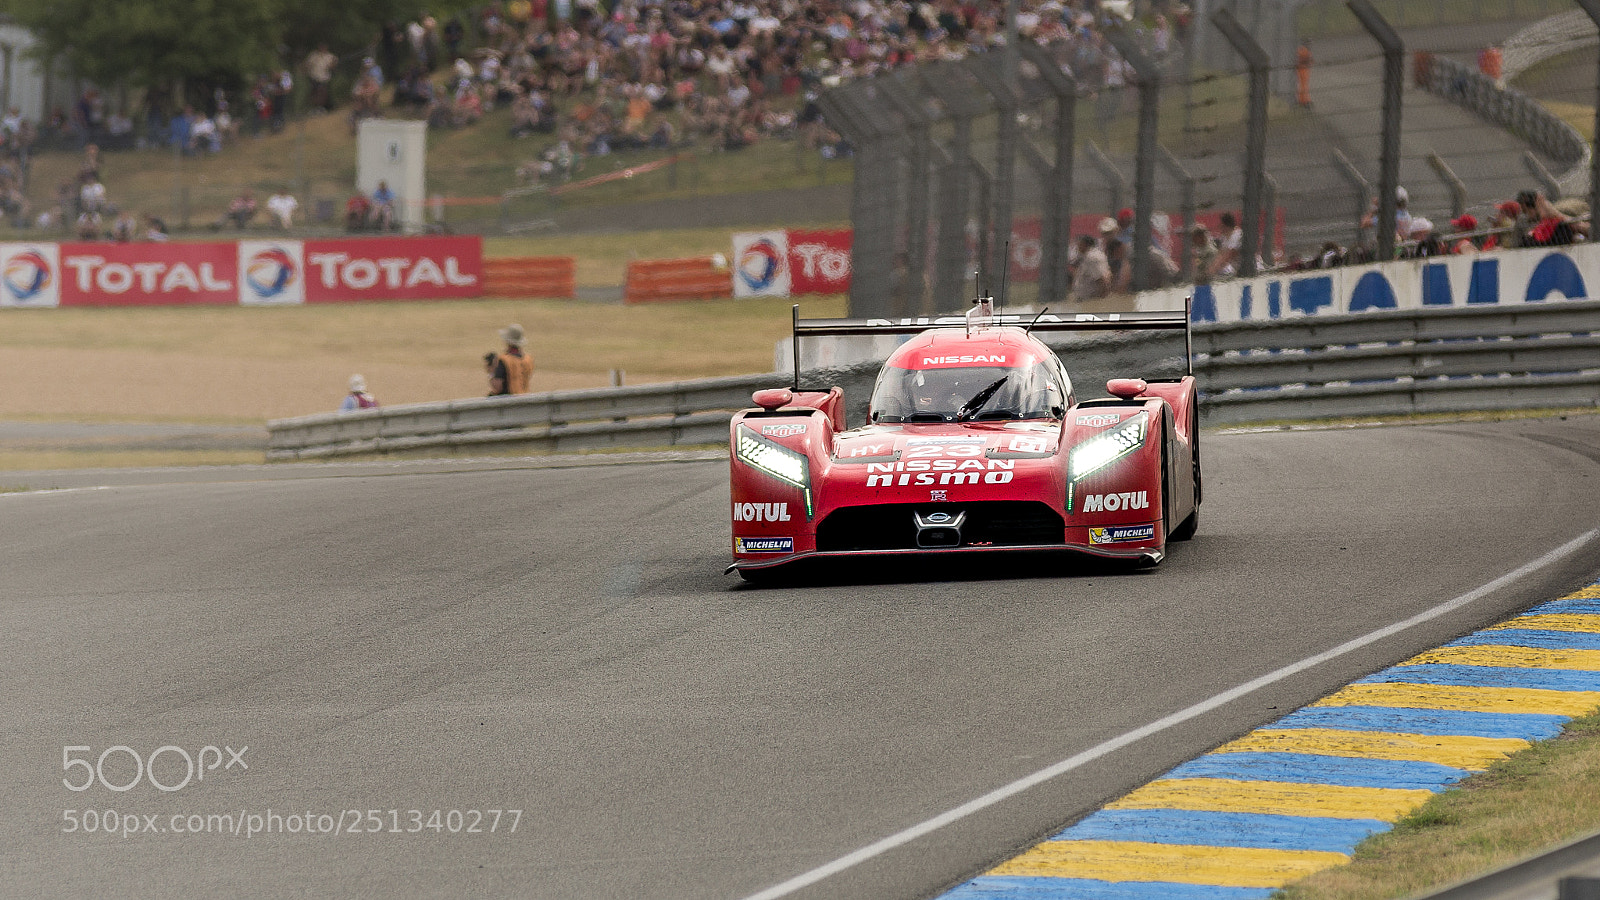 Pentax K-5 sample photo. Nissan gt-r lm nismo photography